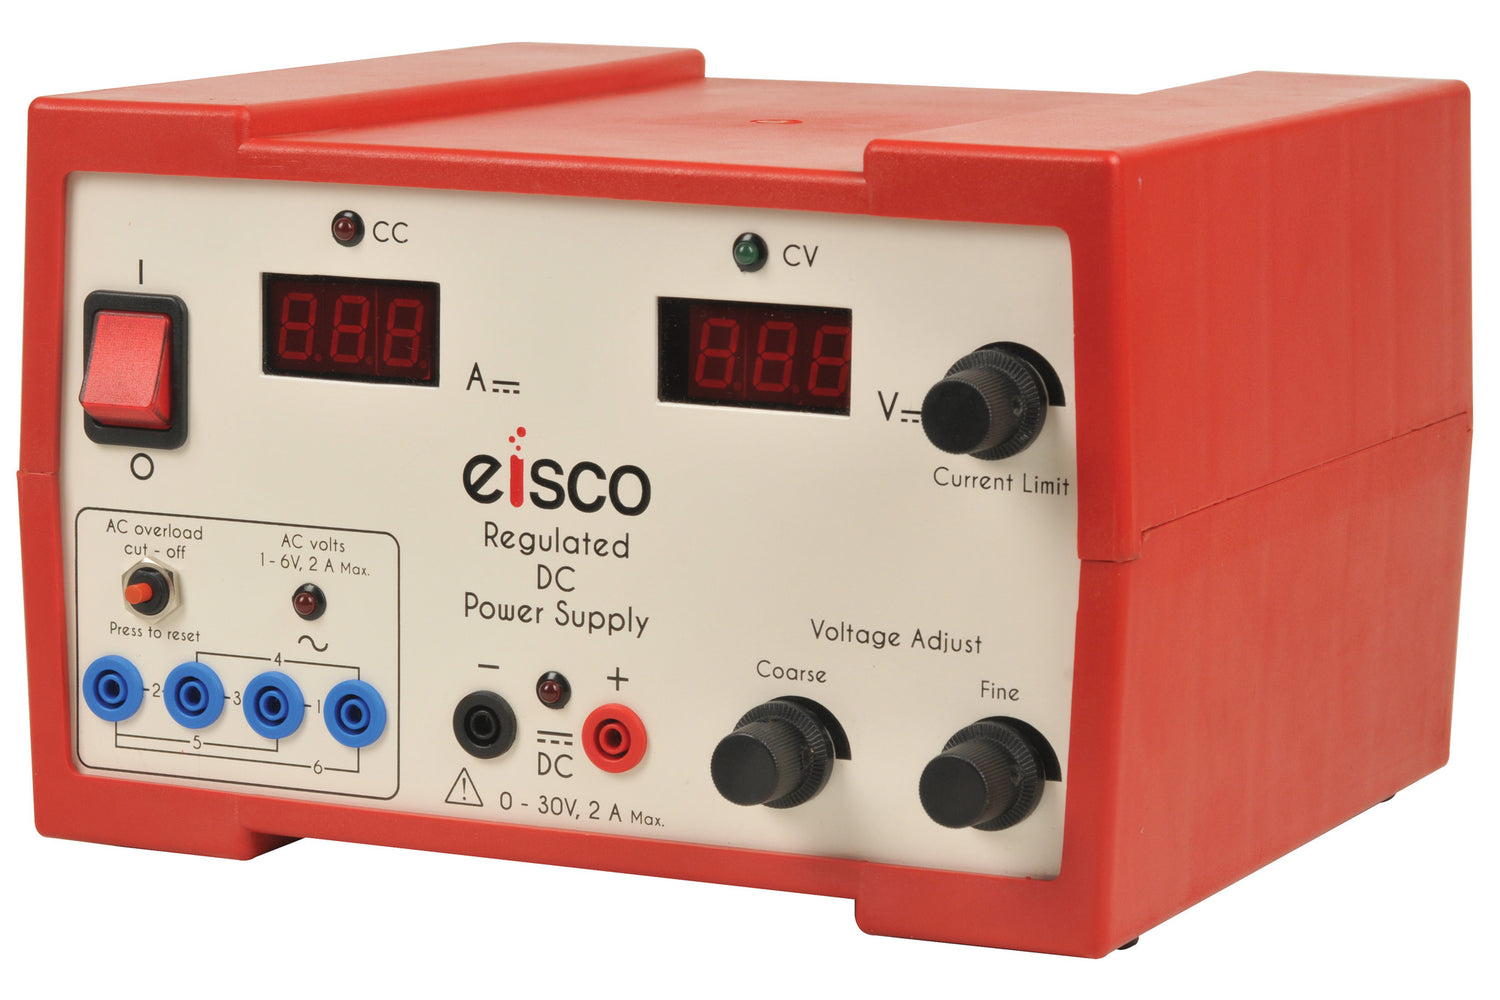 Power Supplies Regulated DC 0-30V / 2 Amp. — Eisco Labs